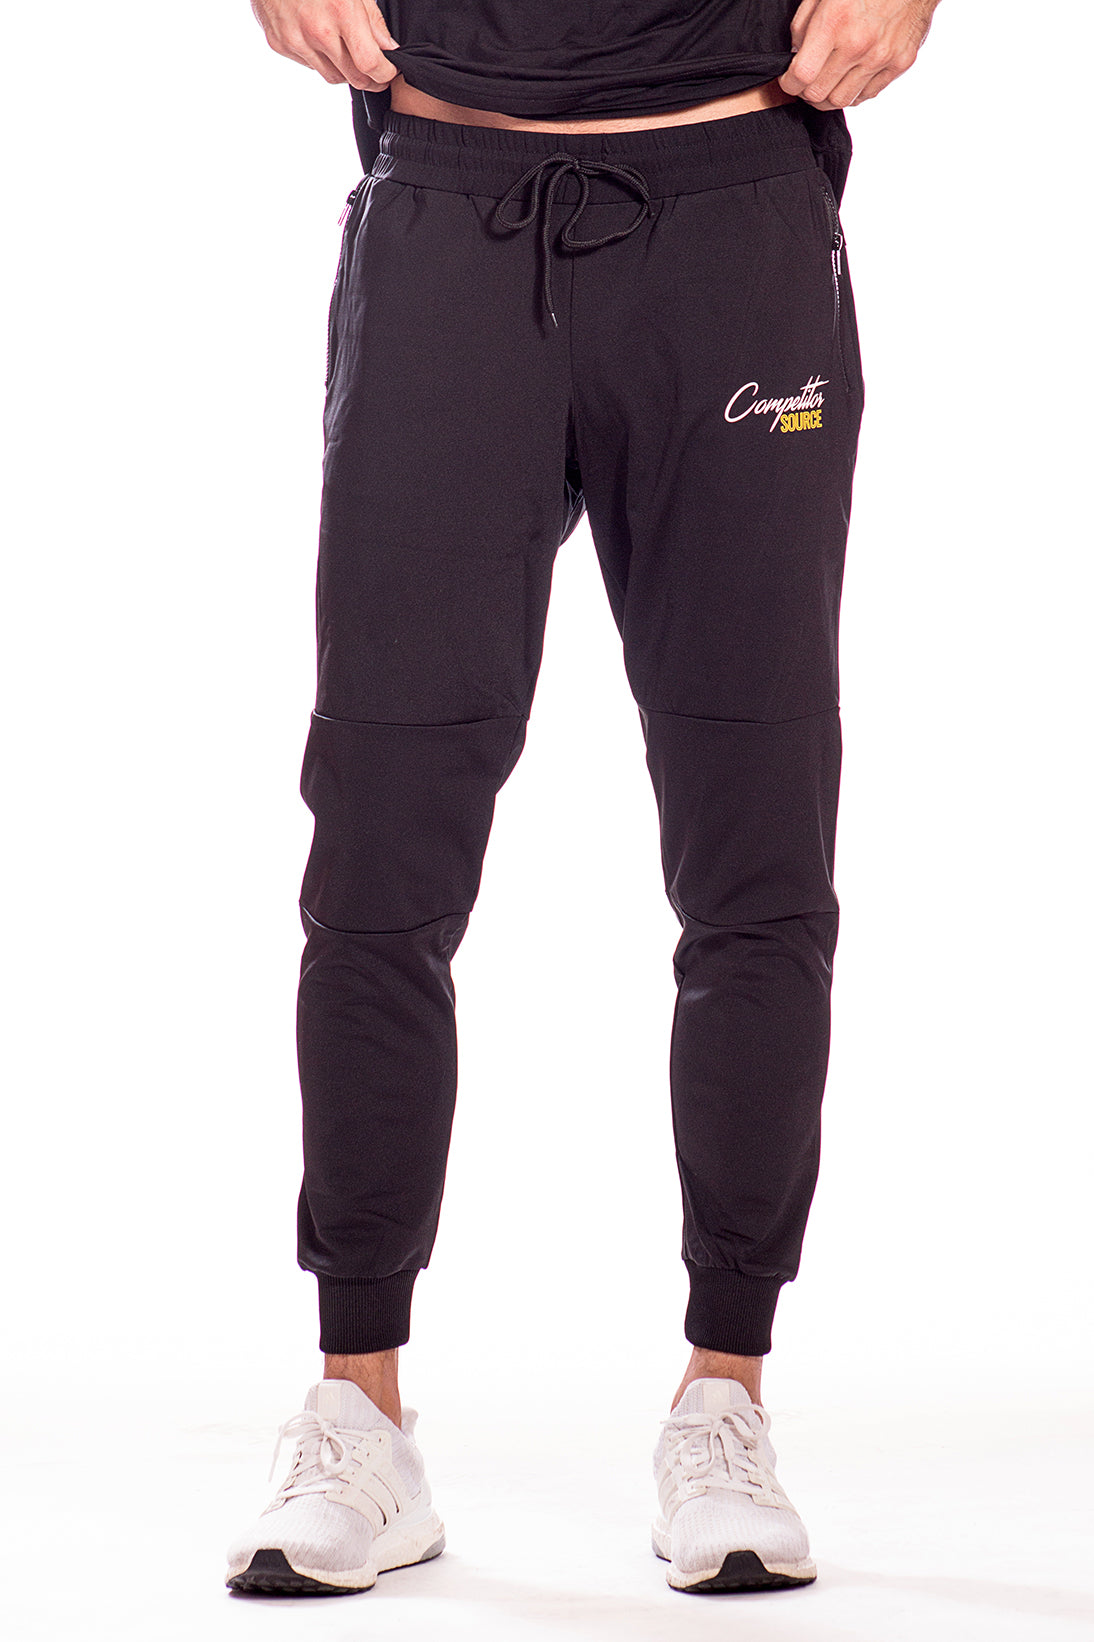 Men's Performance Training Joggers - Competitor Source